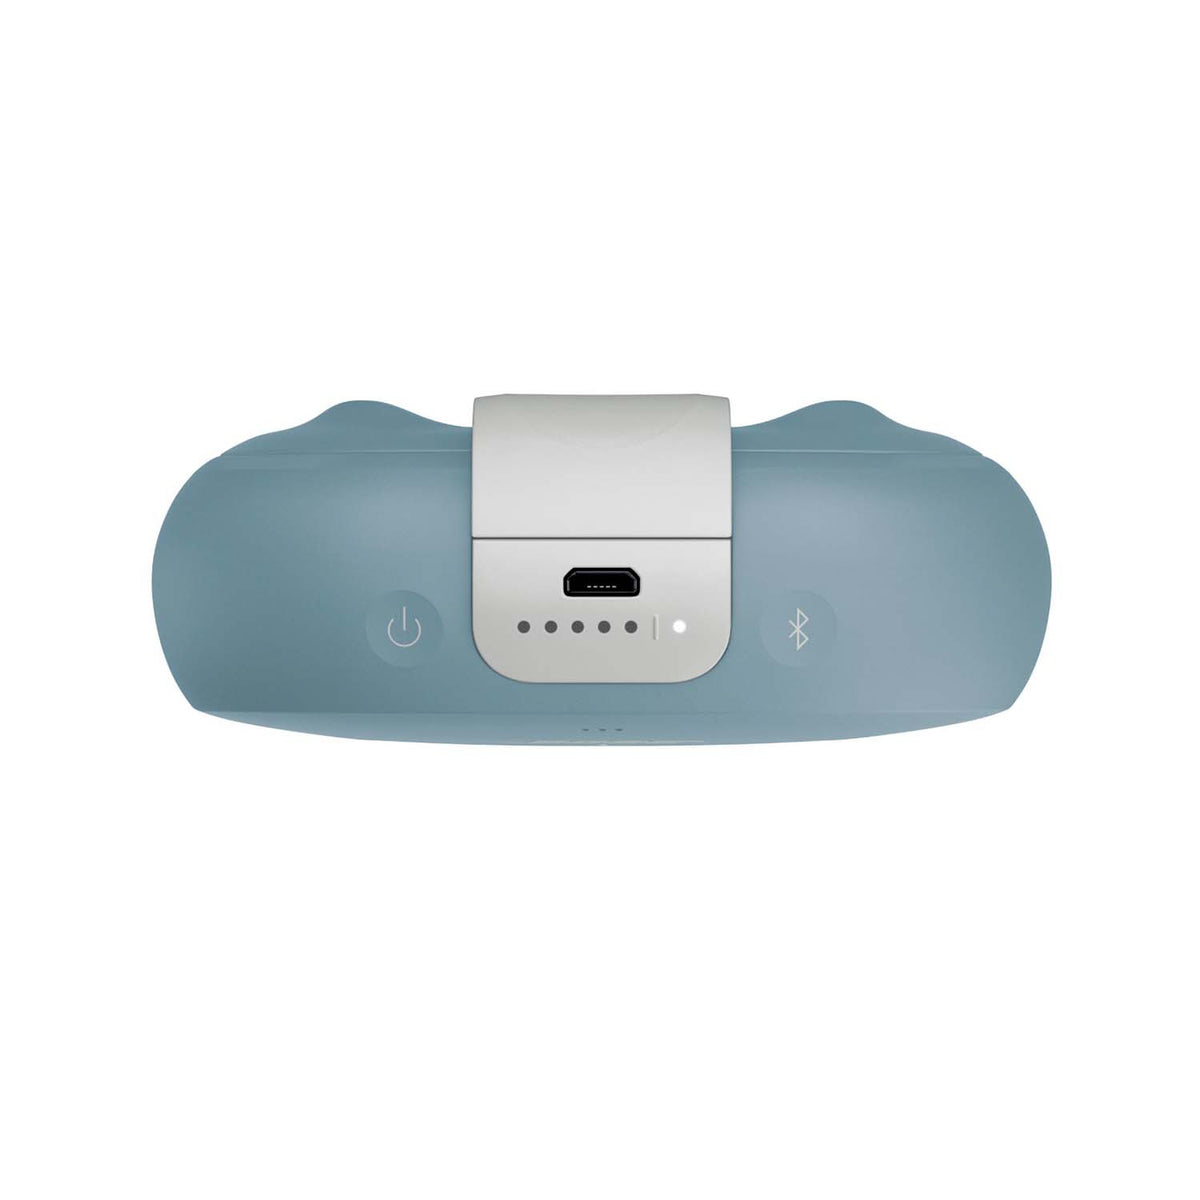 Bose SoundLink Micro Bluetooth Speaker with USB Adapter - Stone Blue